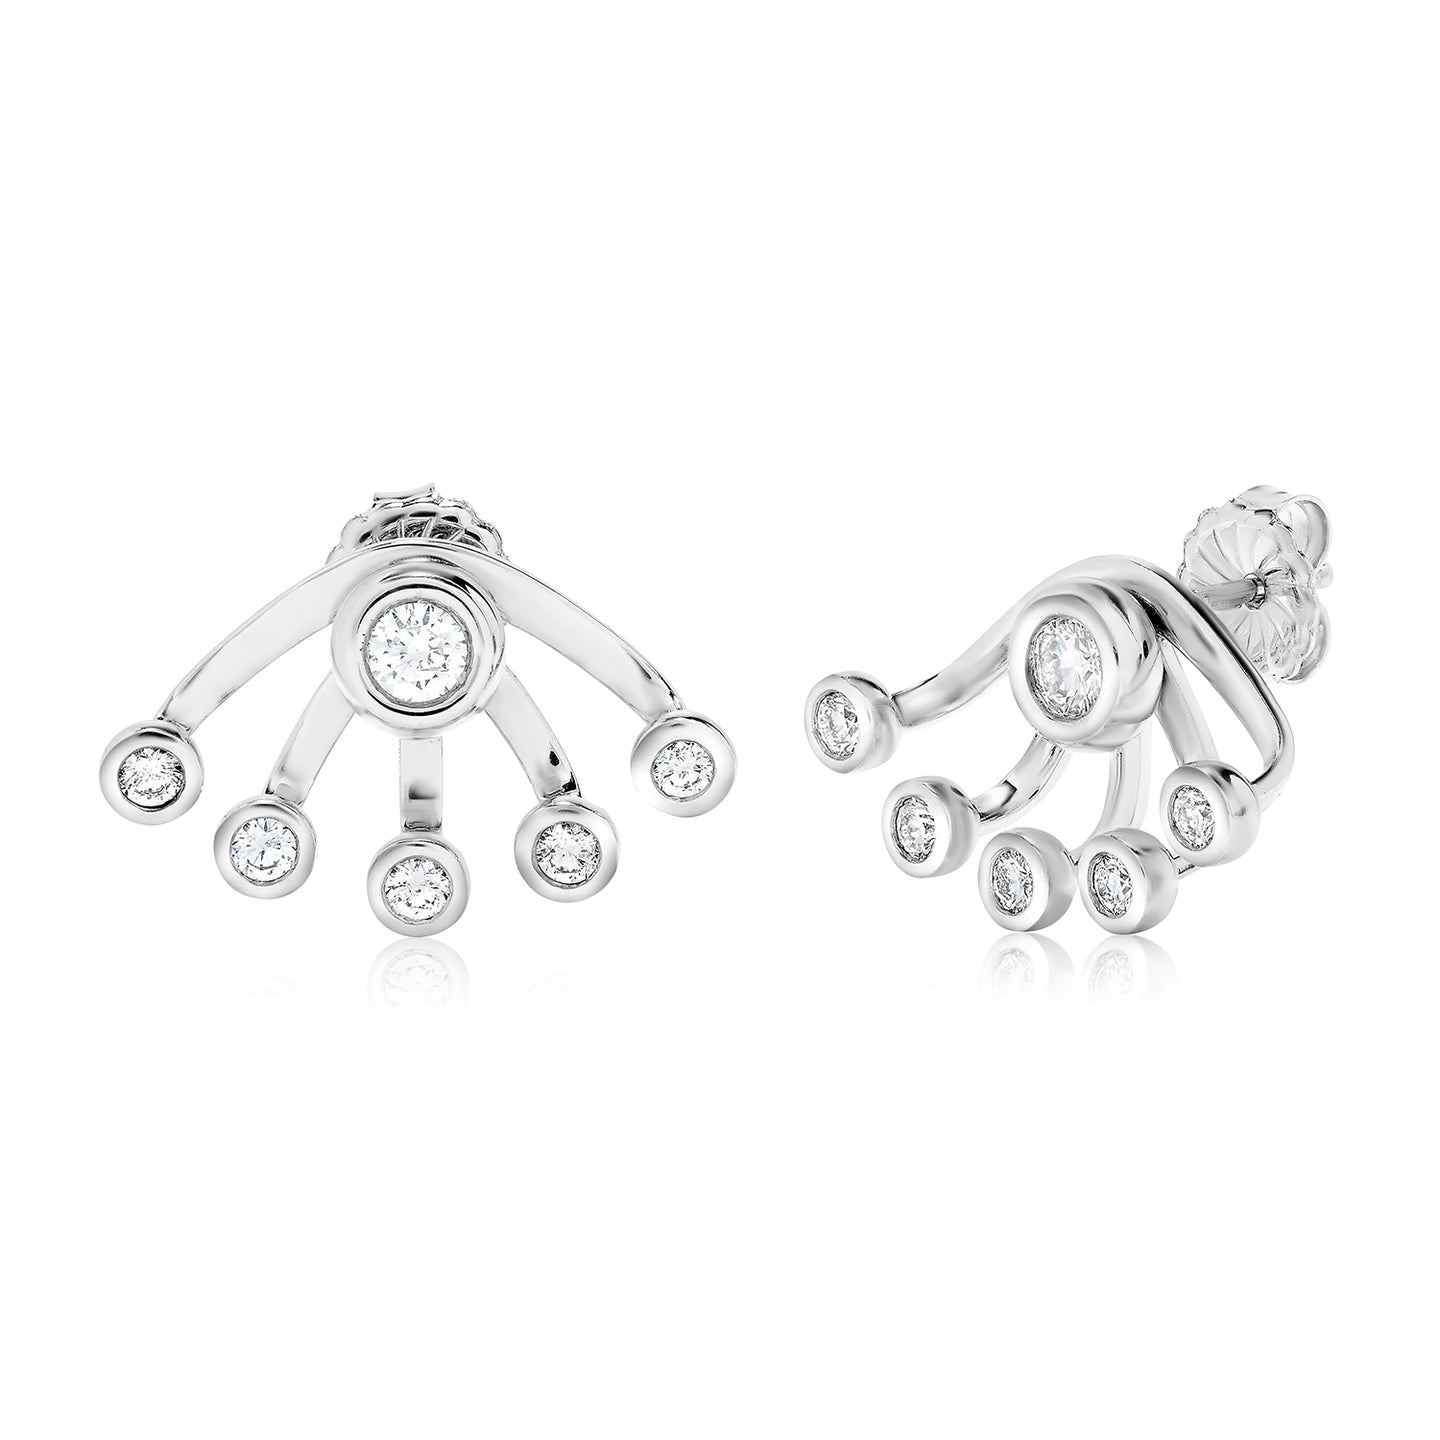 Sabel Collection 18K White Gold Bezel Stud and Wrap Earring Jacket Earrings